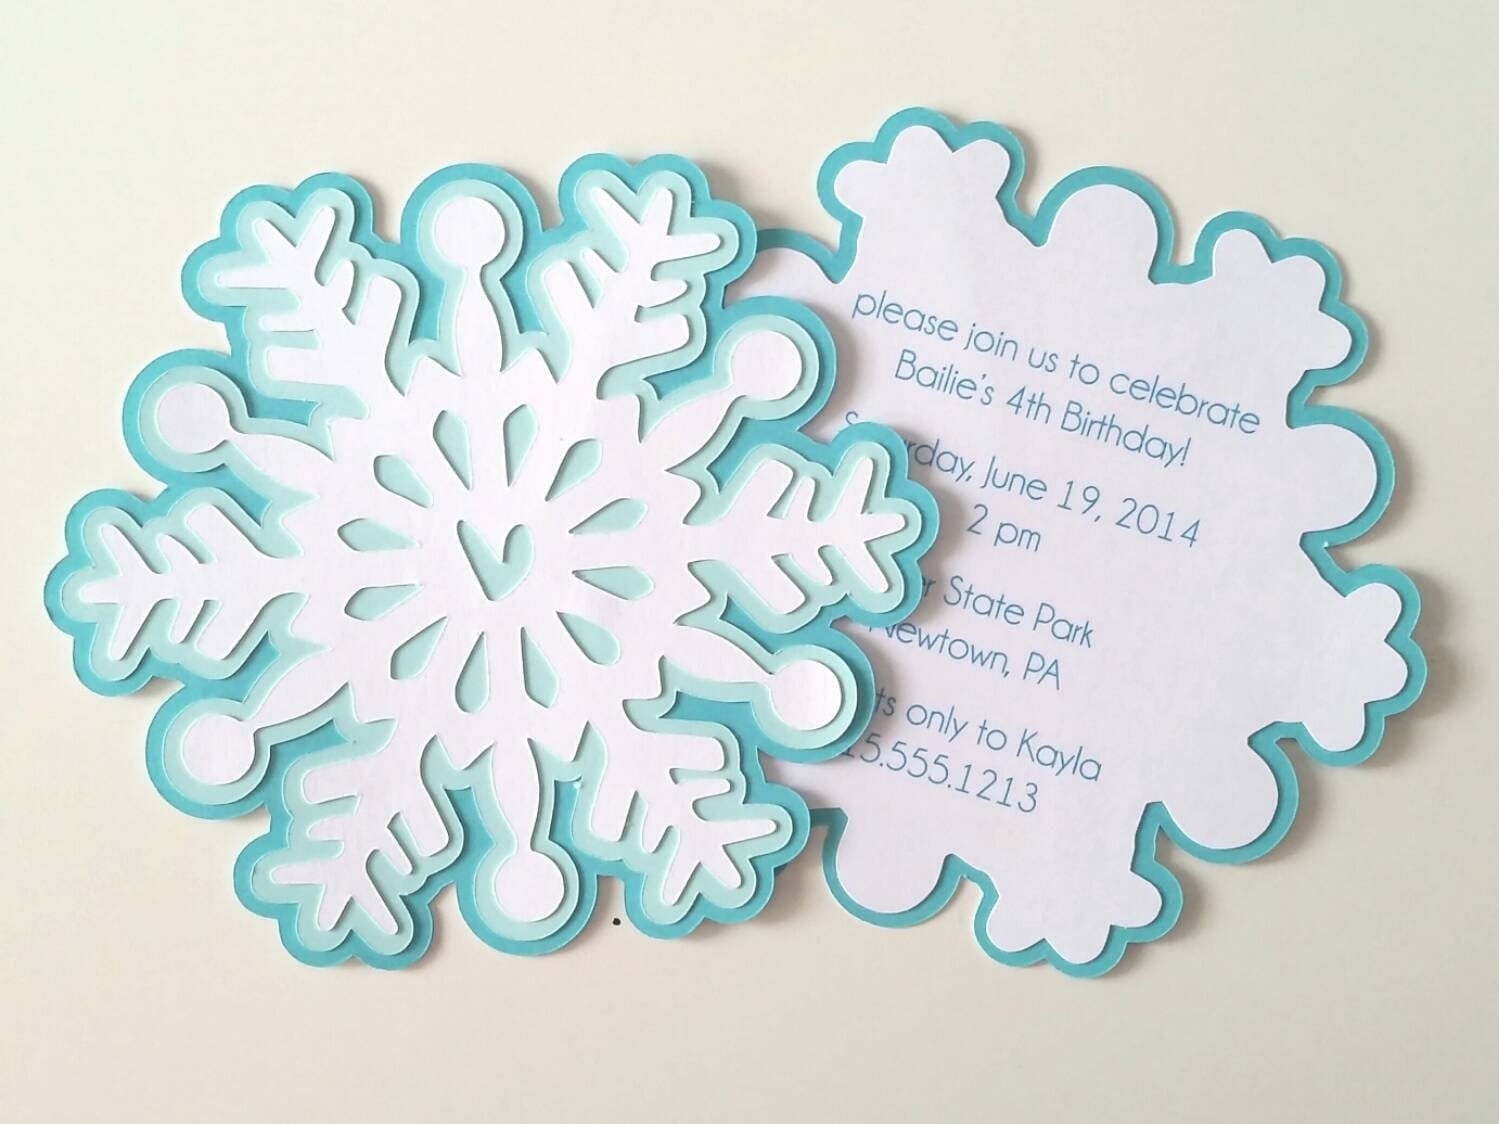 snowflake-party-invitation-pack-of-10